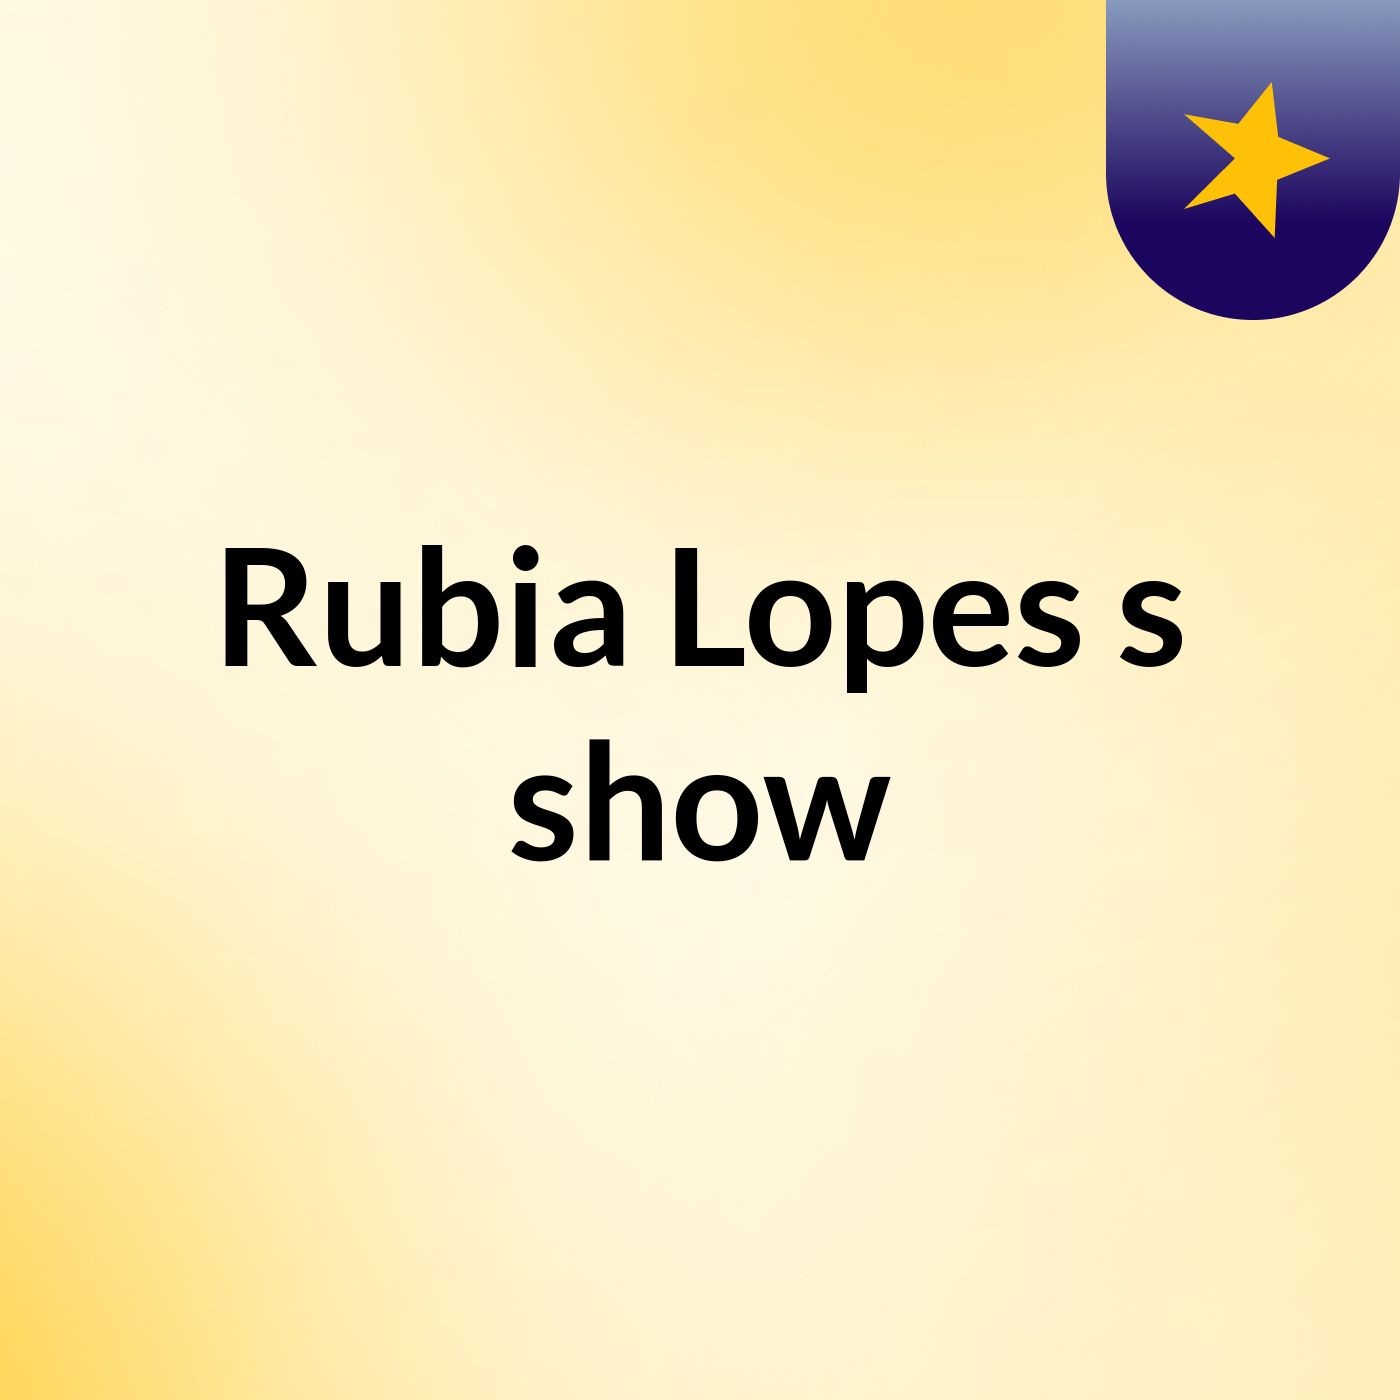 Rubia Lopes's show